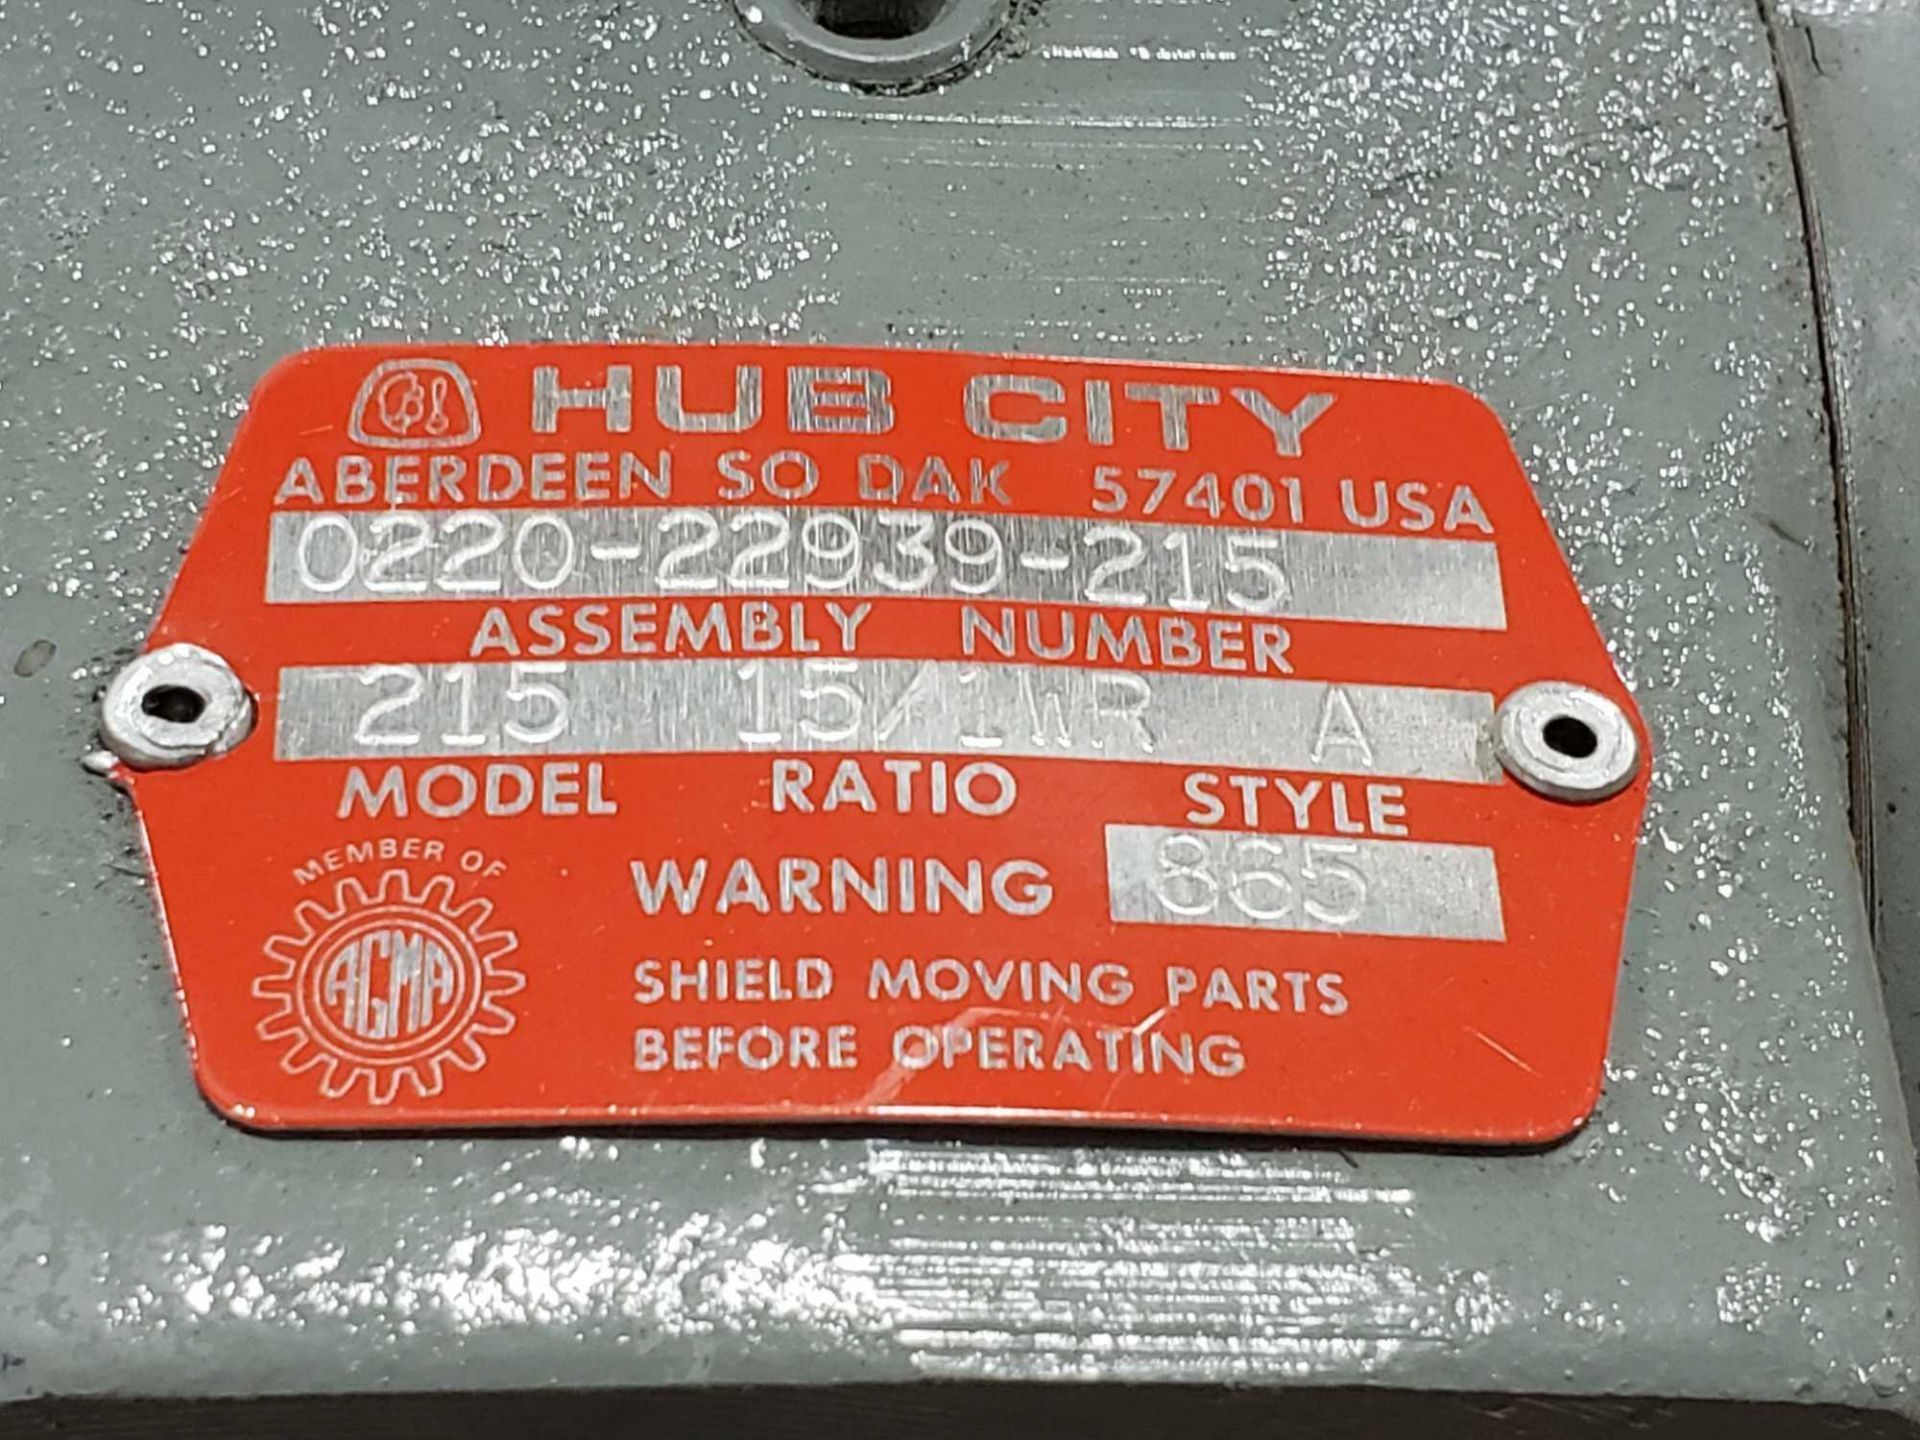 Hub City gear box speed reducer model 215, ratio 15/1WR, style A. New in box. - Image 3 of 3